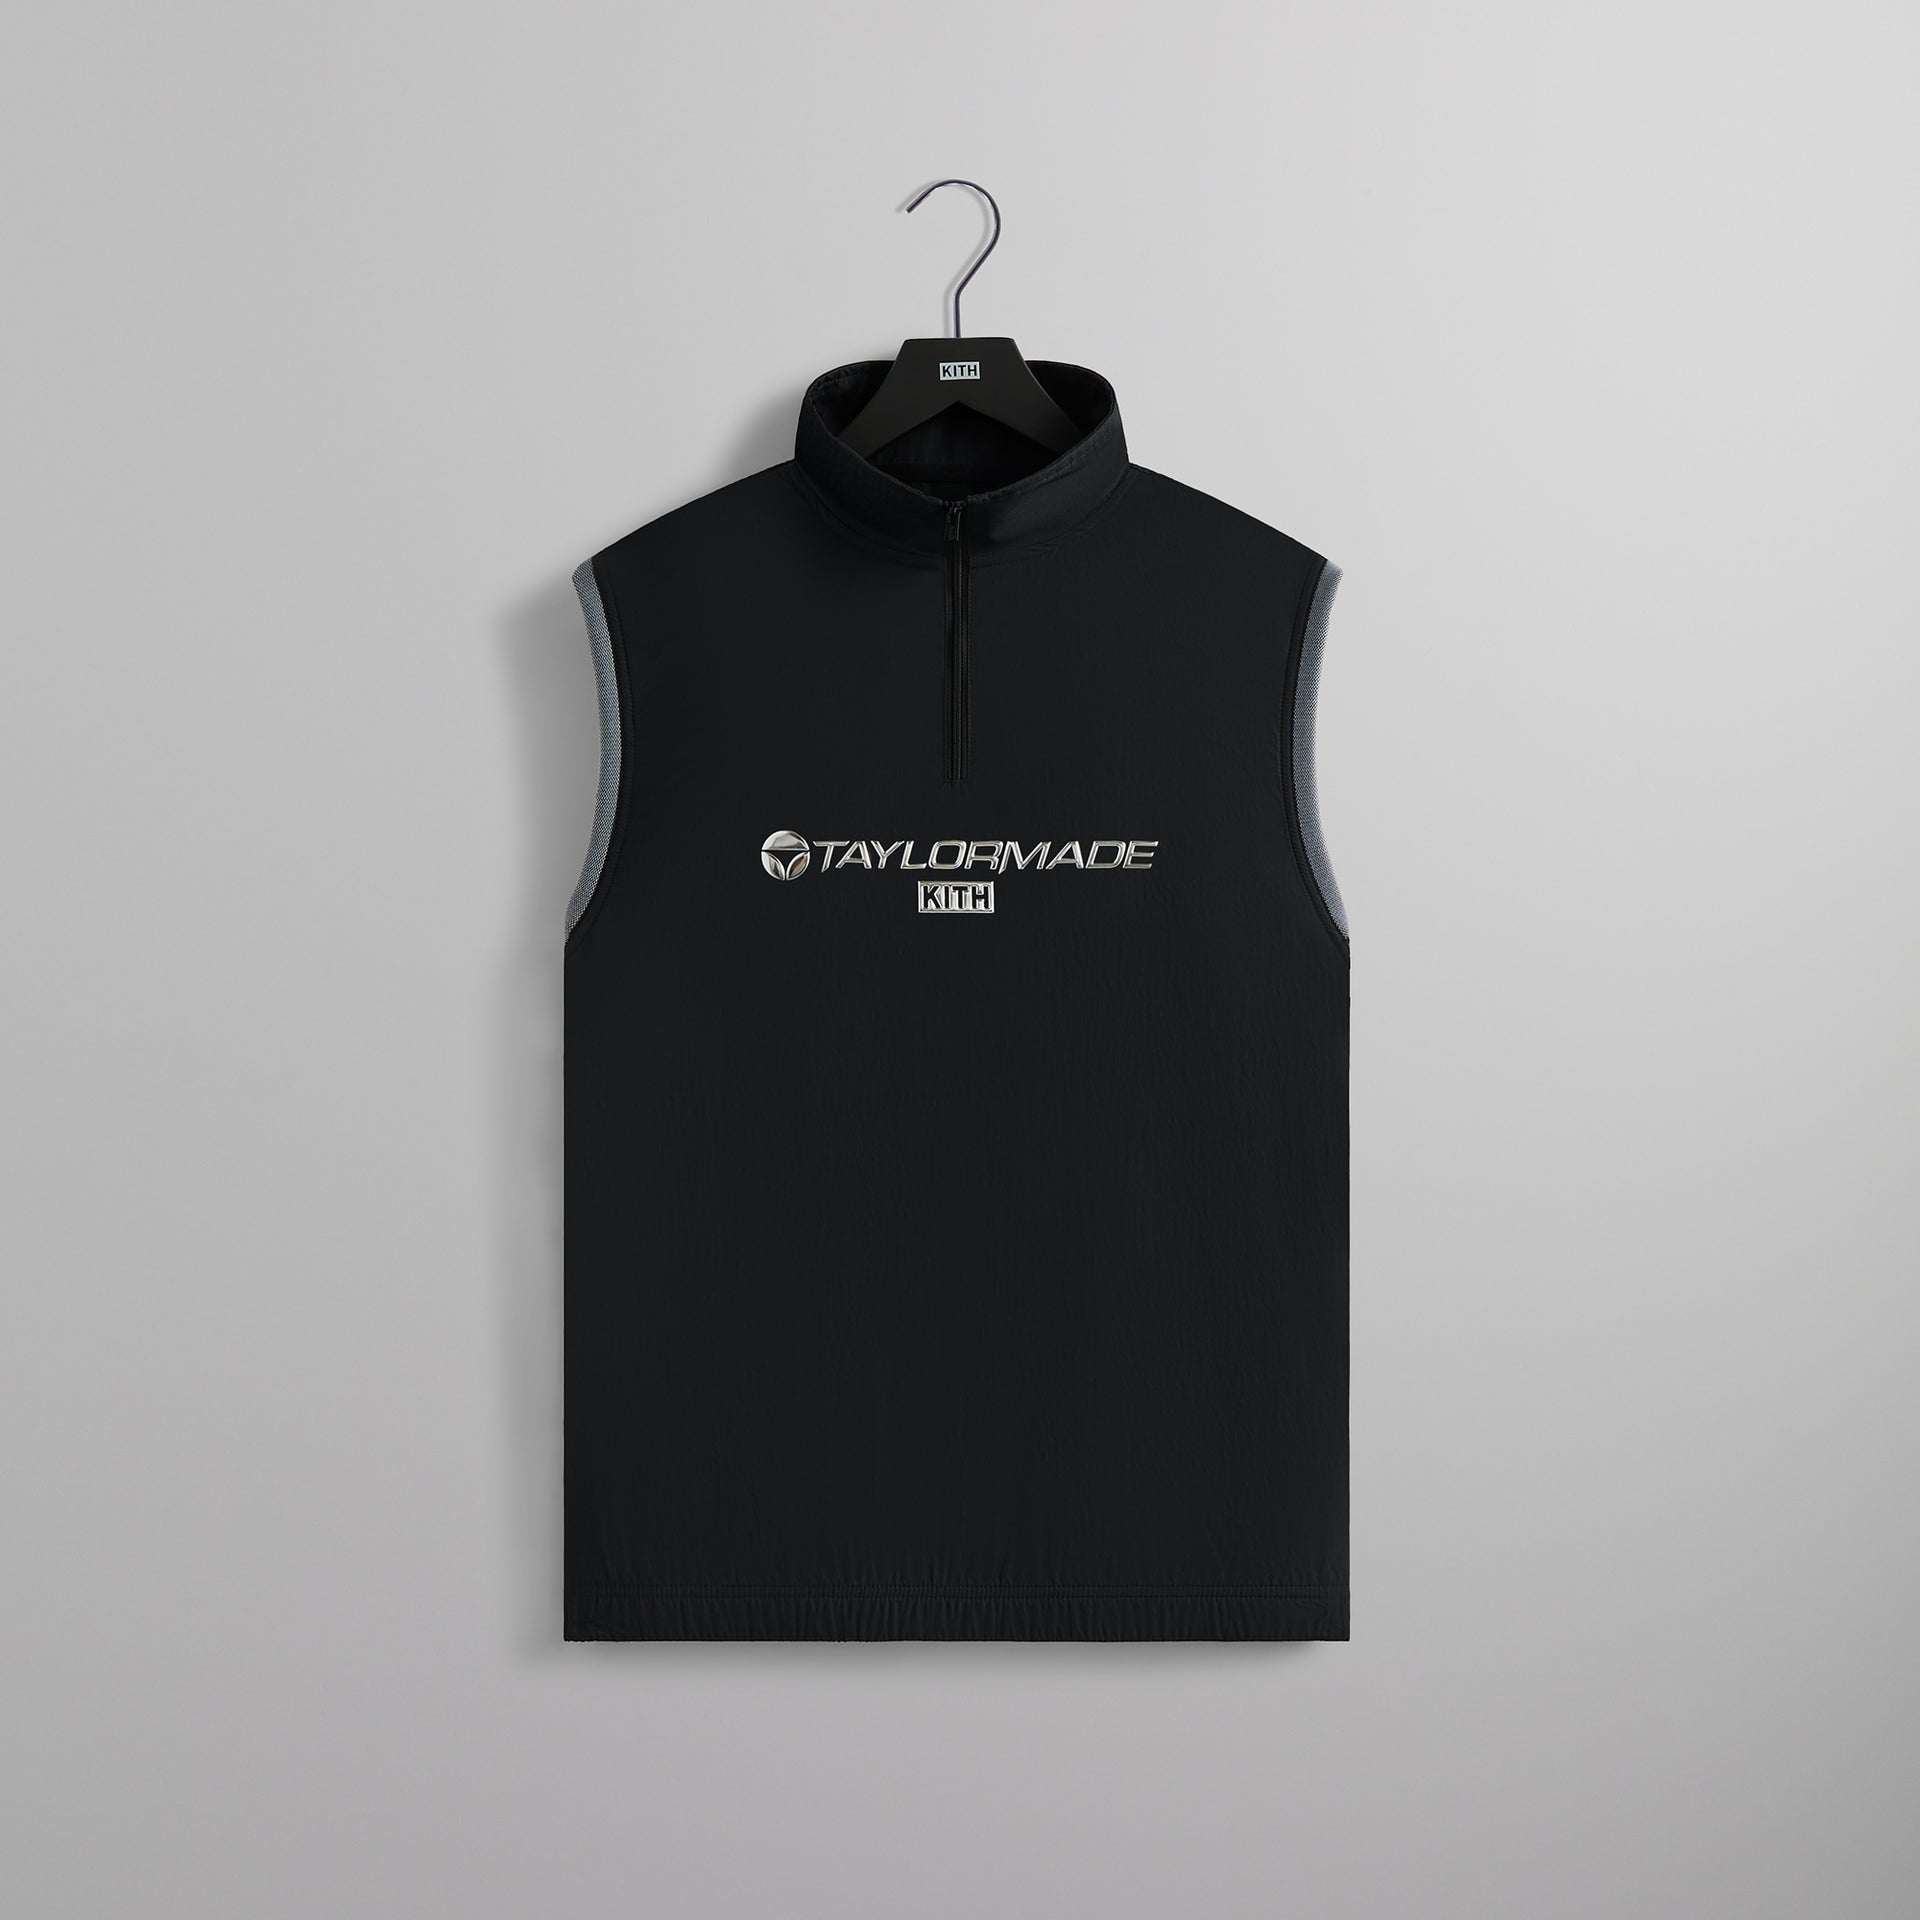 Kith for TaylorMade Blade Vest - Black PH